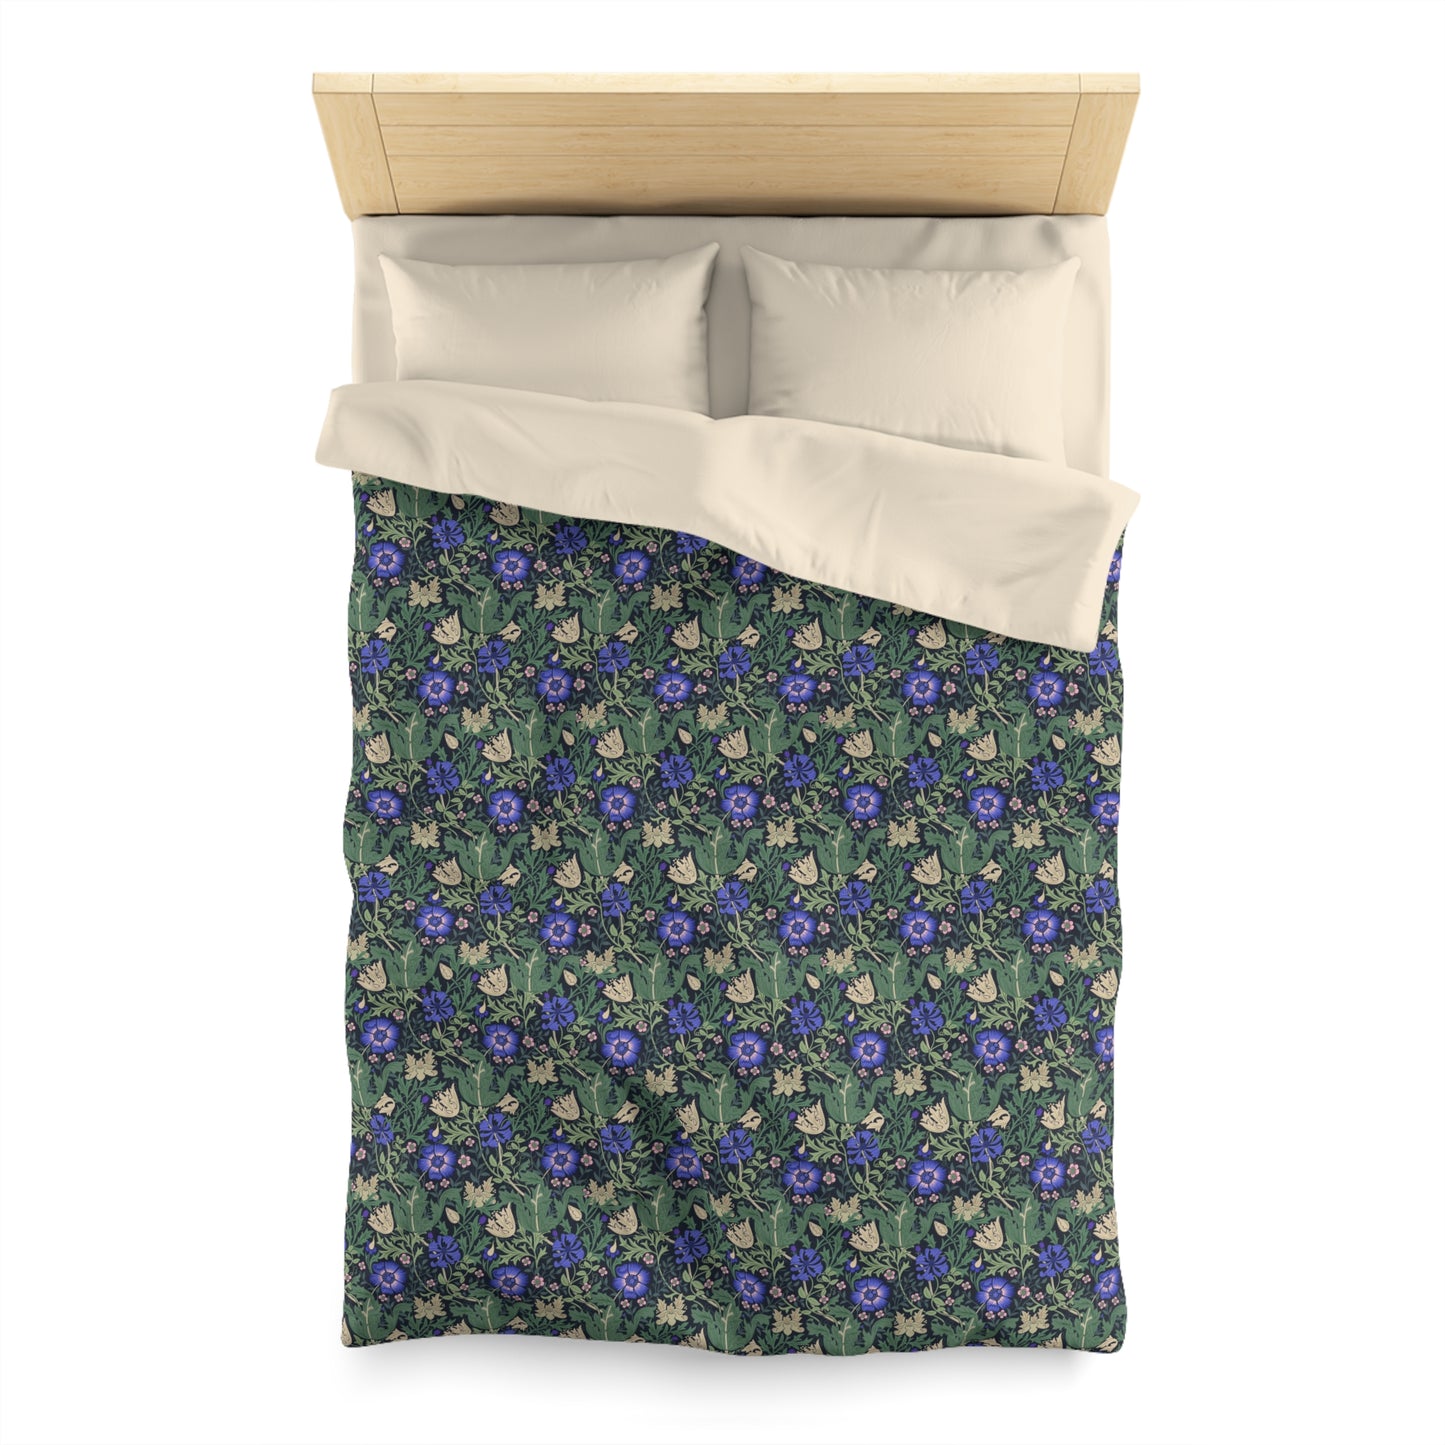 william-morris-co-microfibre-duvet-cover-compton-collection-bluebell-cottage-3